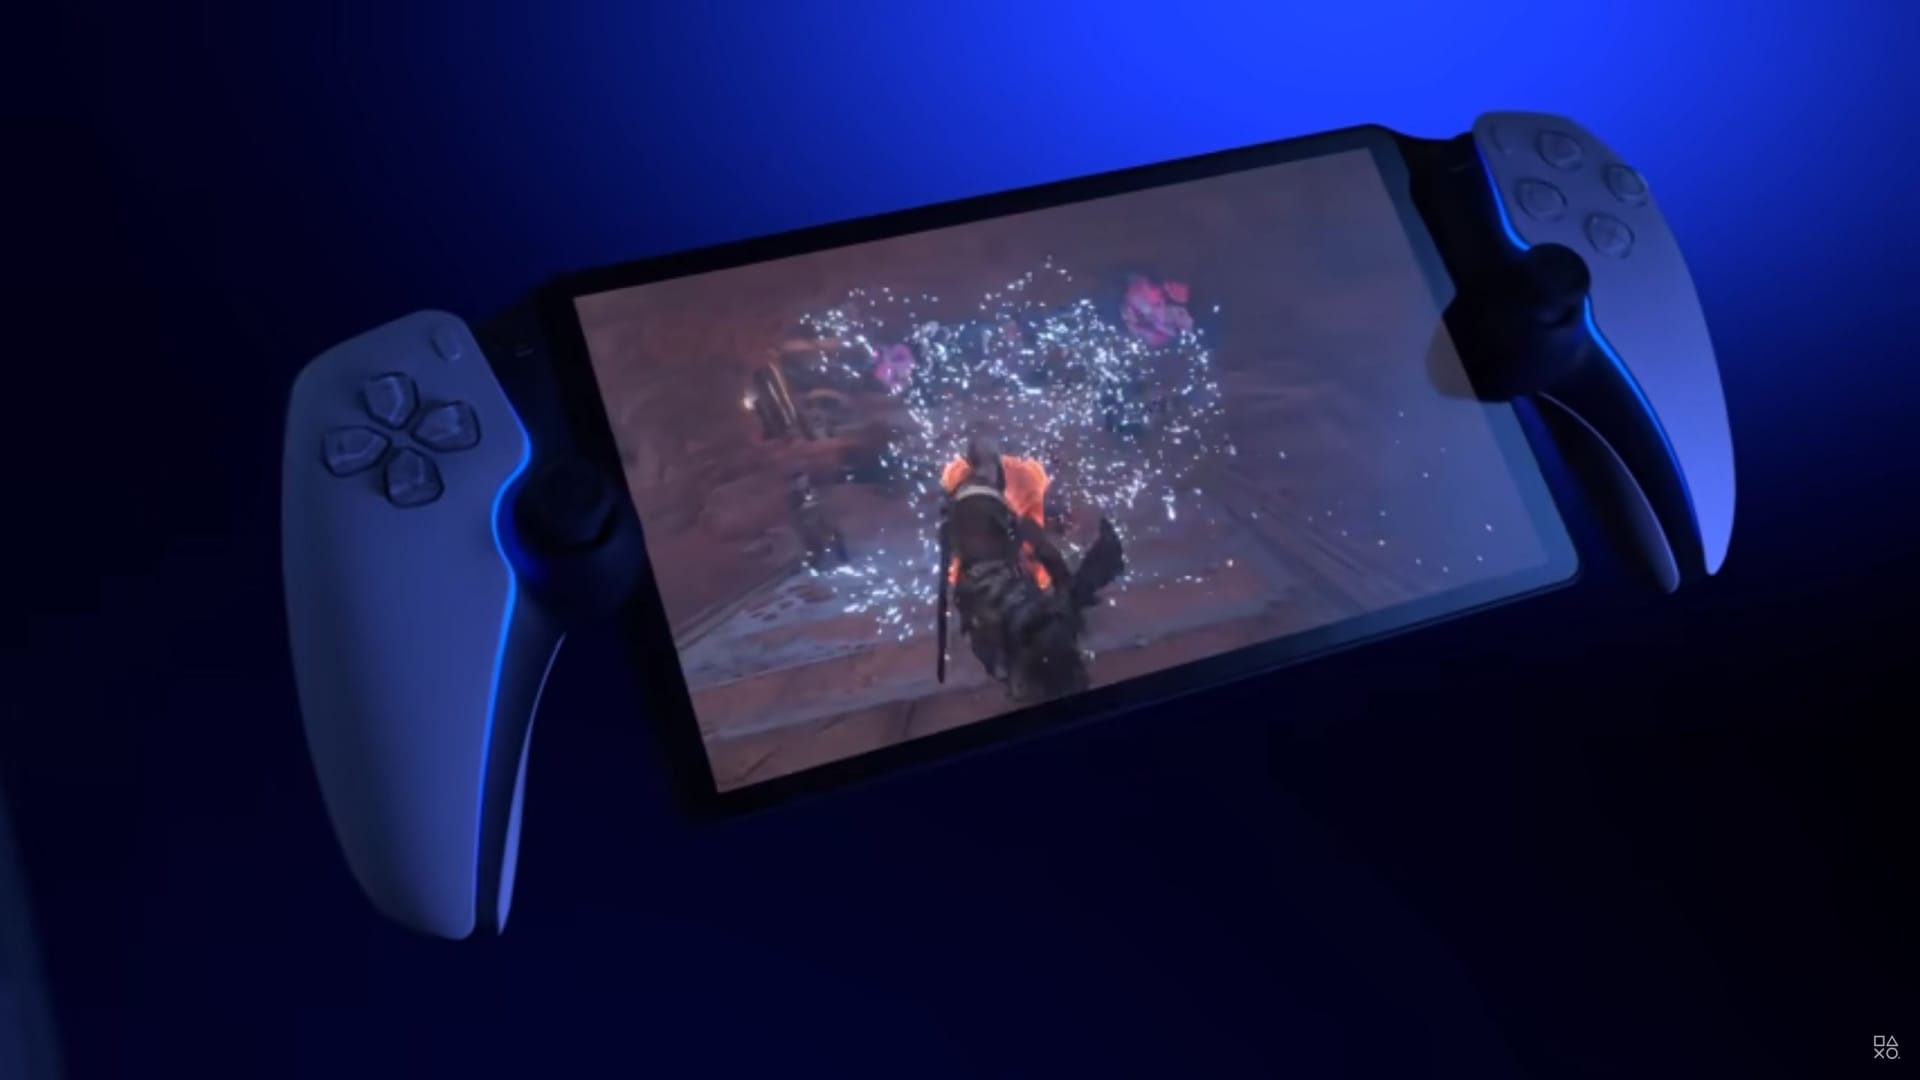 Project Q, a new handheld device from Sony 